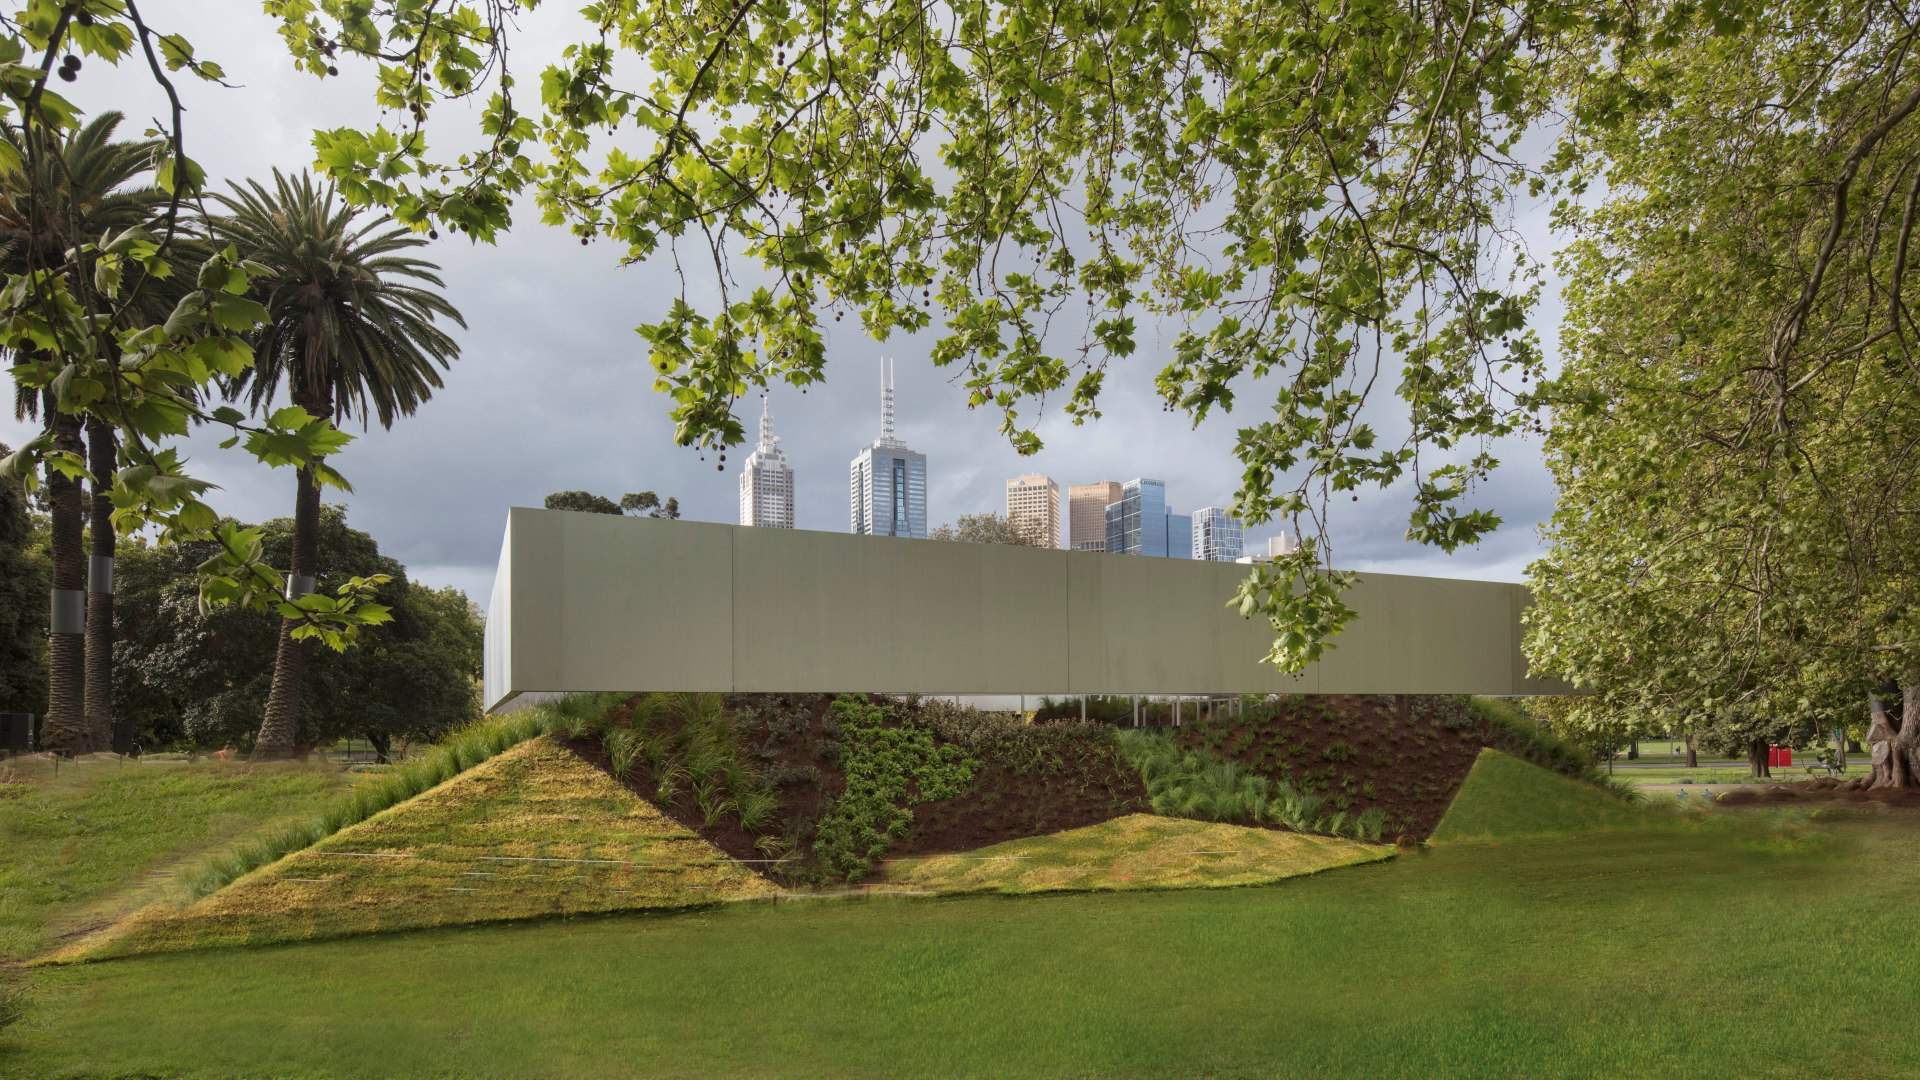 Five Free Events Not to Miss at Melbourne's 2017 MPavilion Architecture Commission